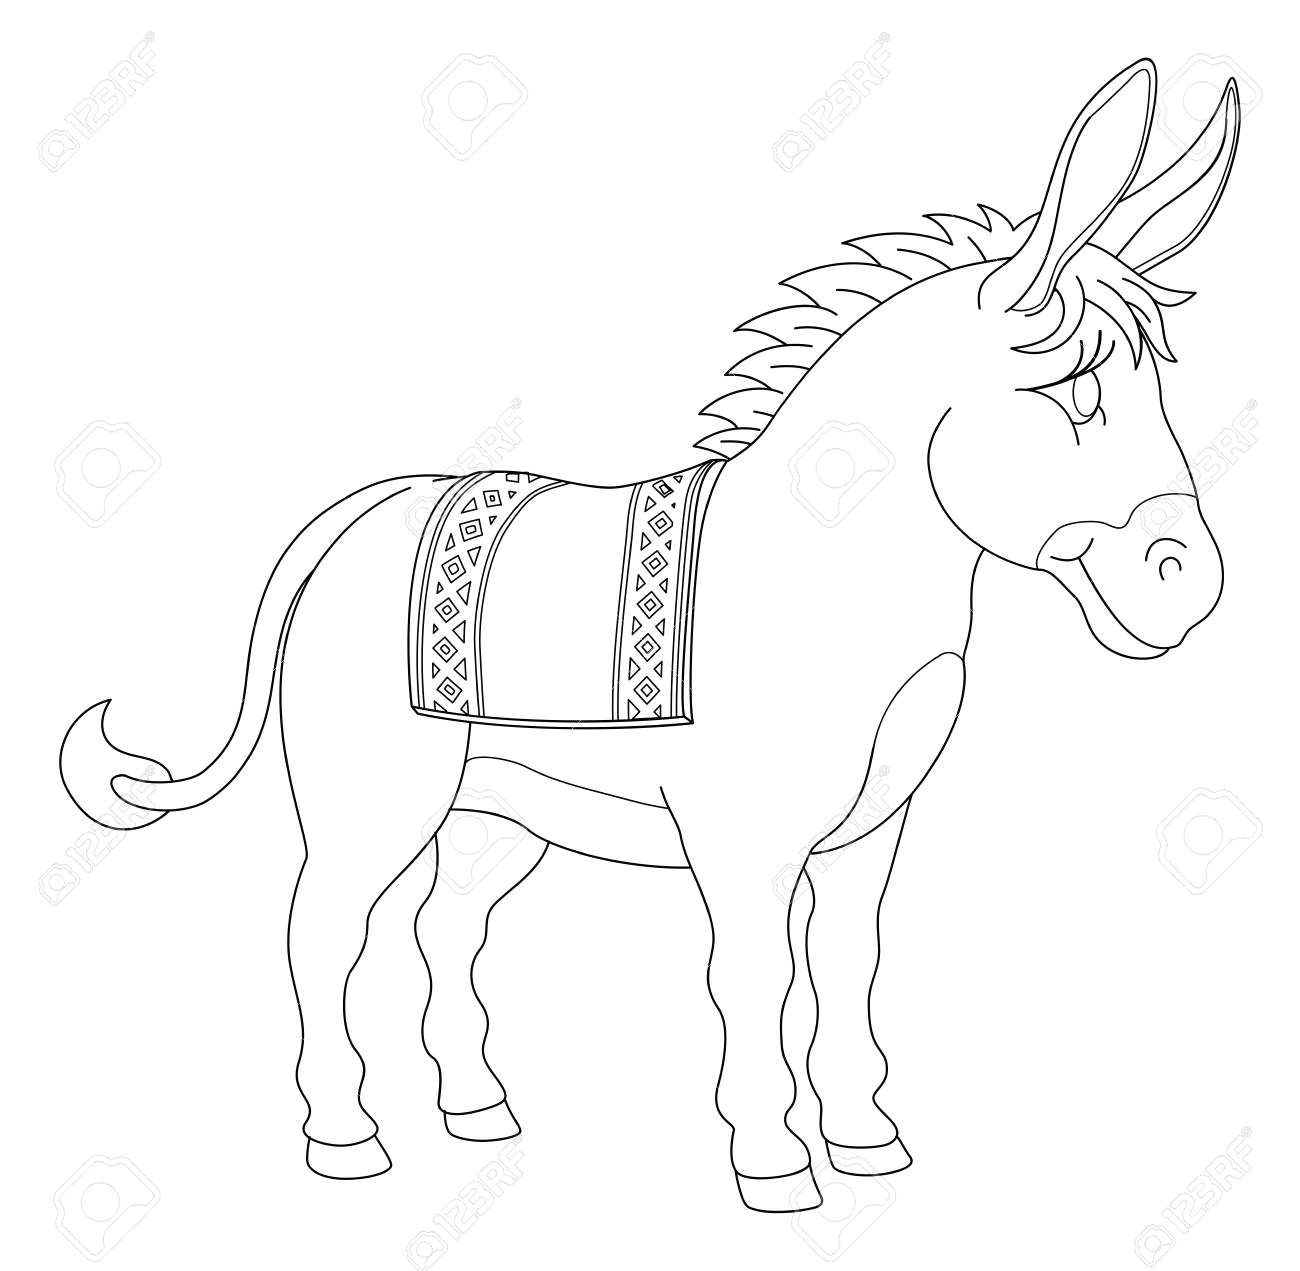 Drawing Cartoon Horse Head A Donkey Animal Cute Cartoon Character Black and White Coloring